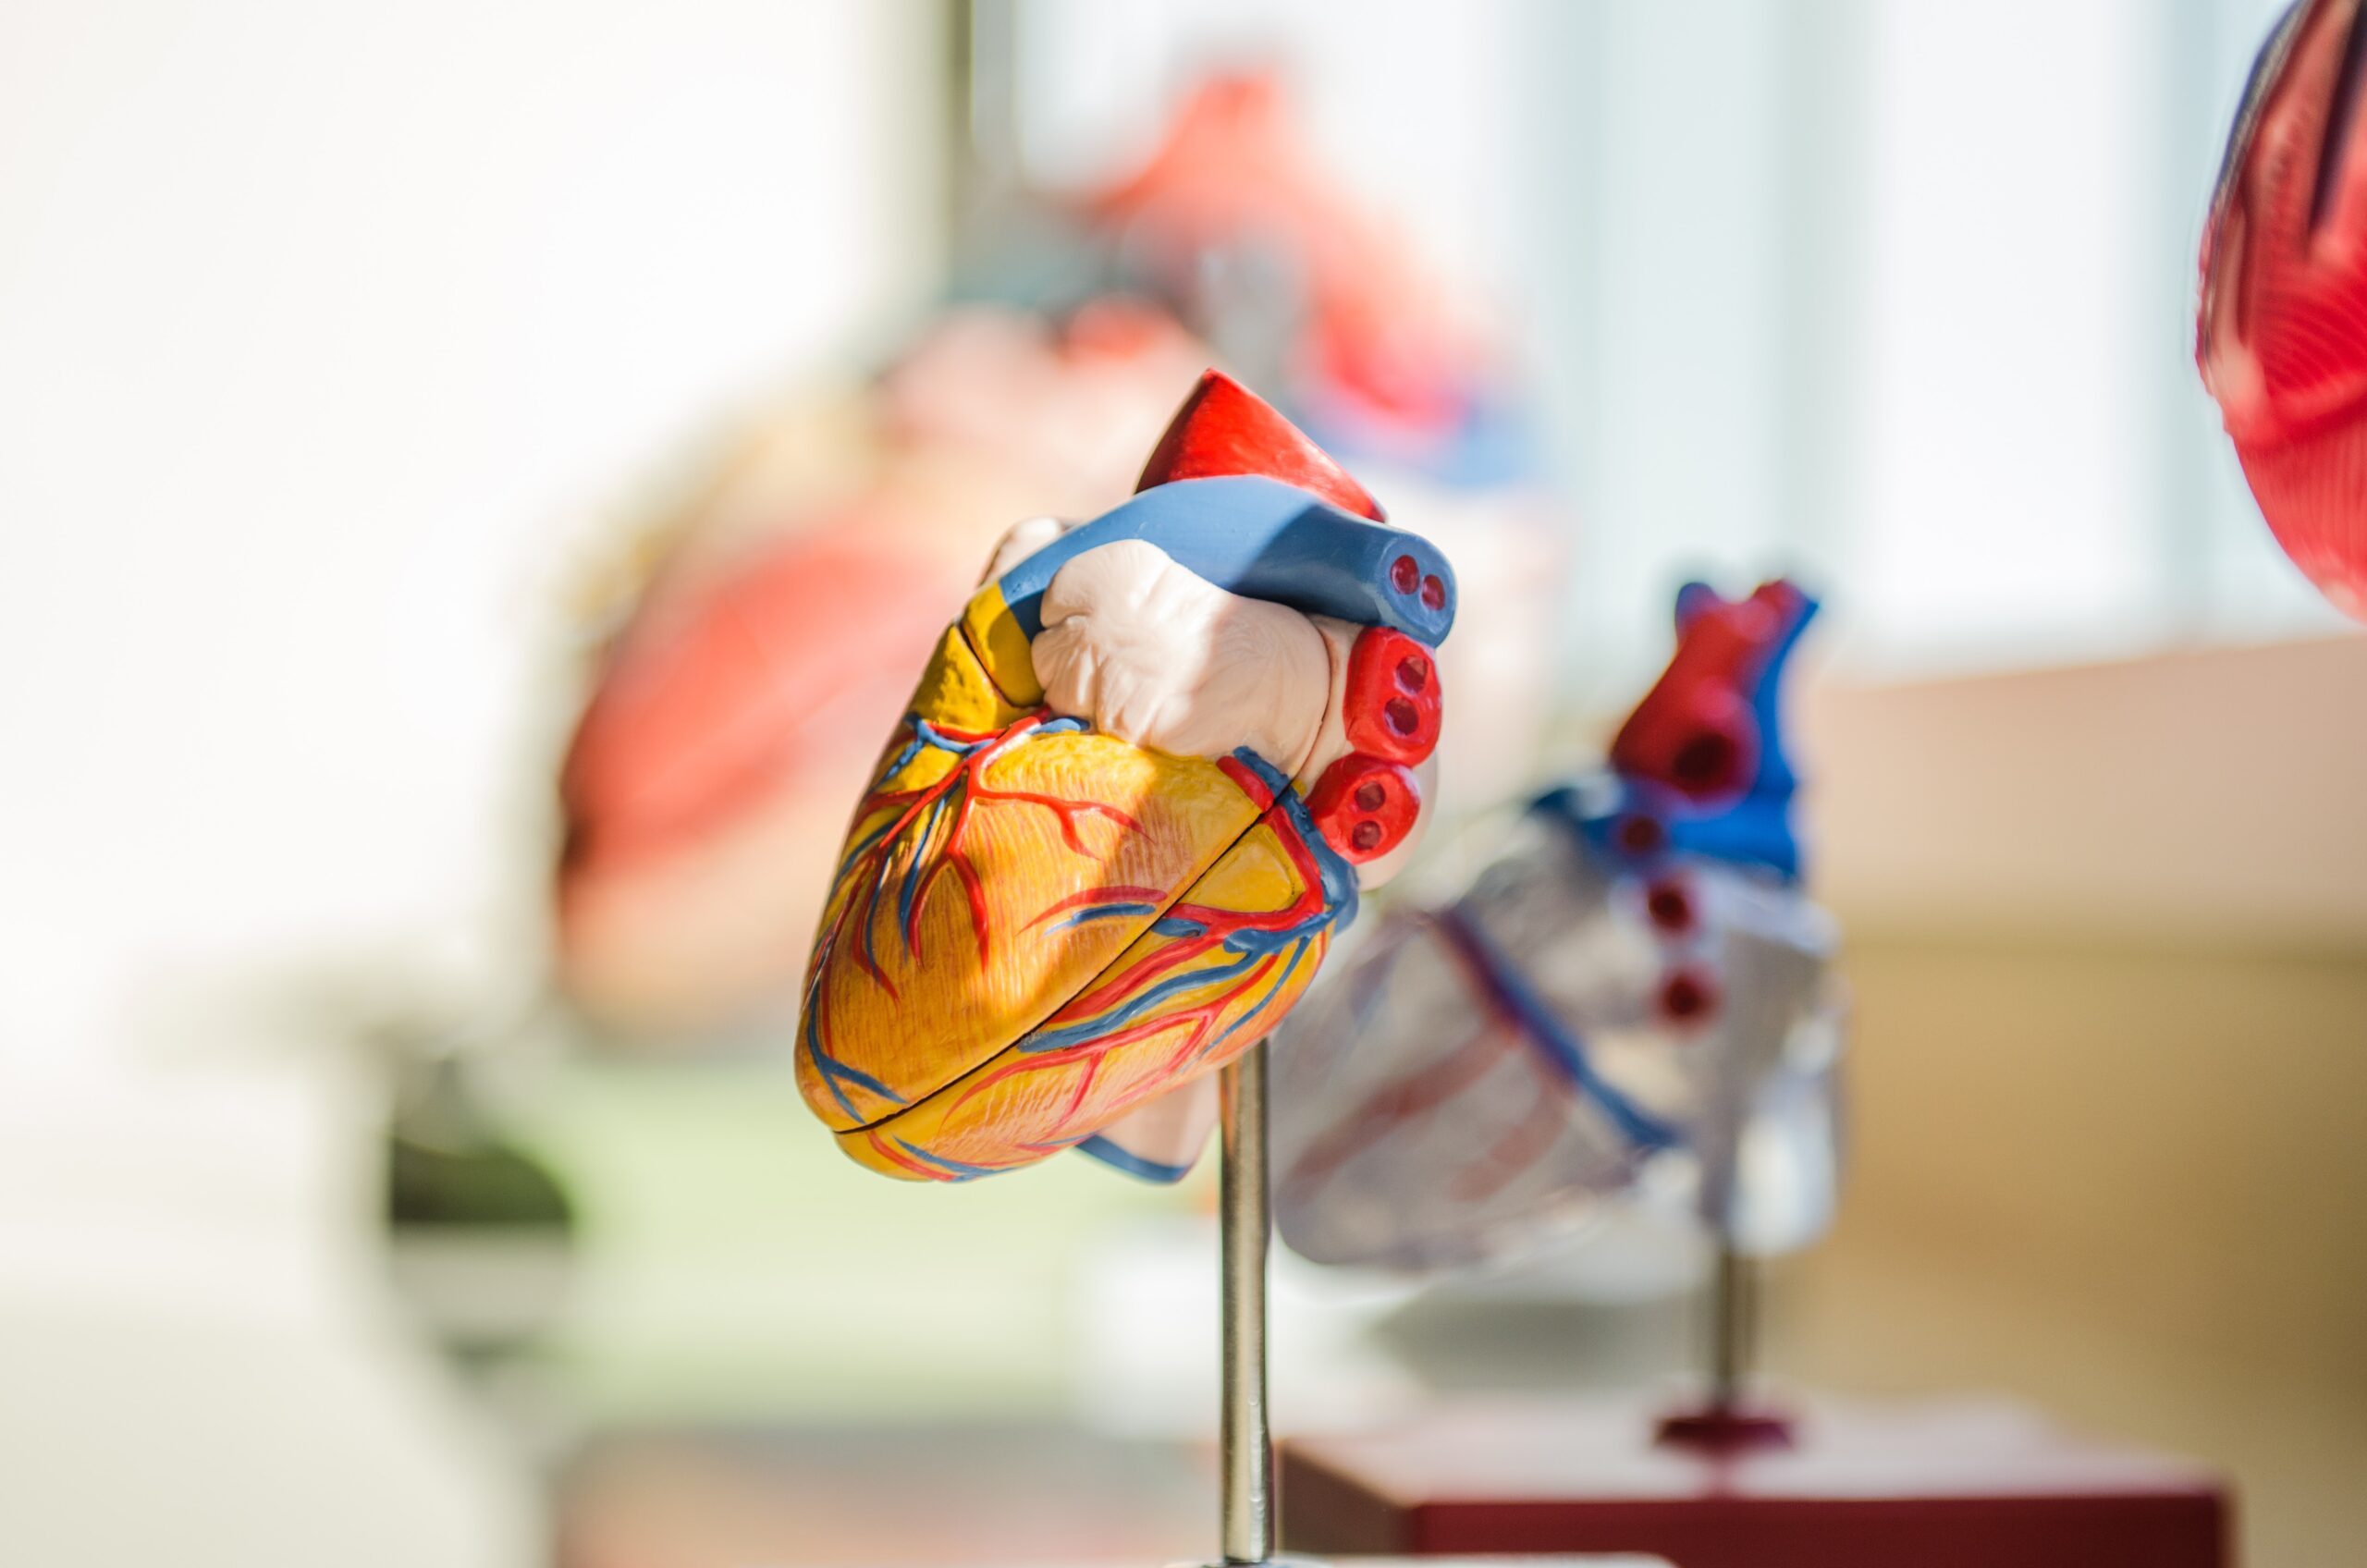 Anatomical model of a heart